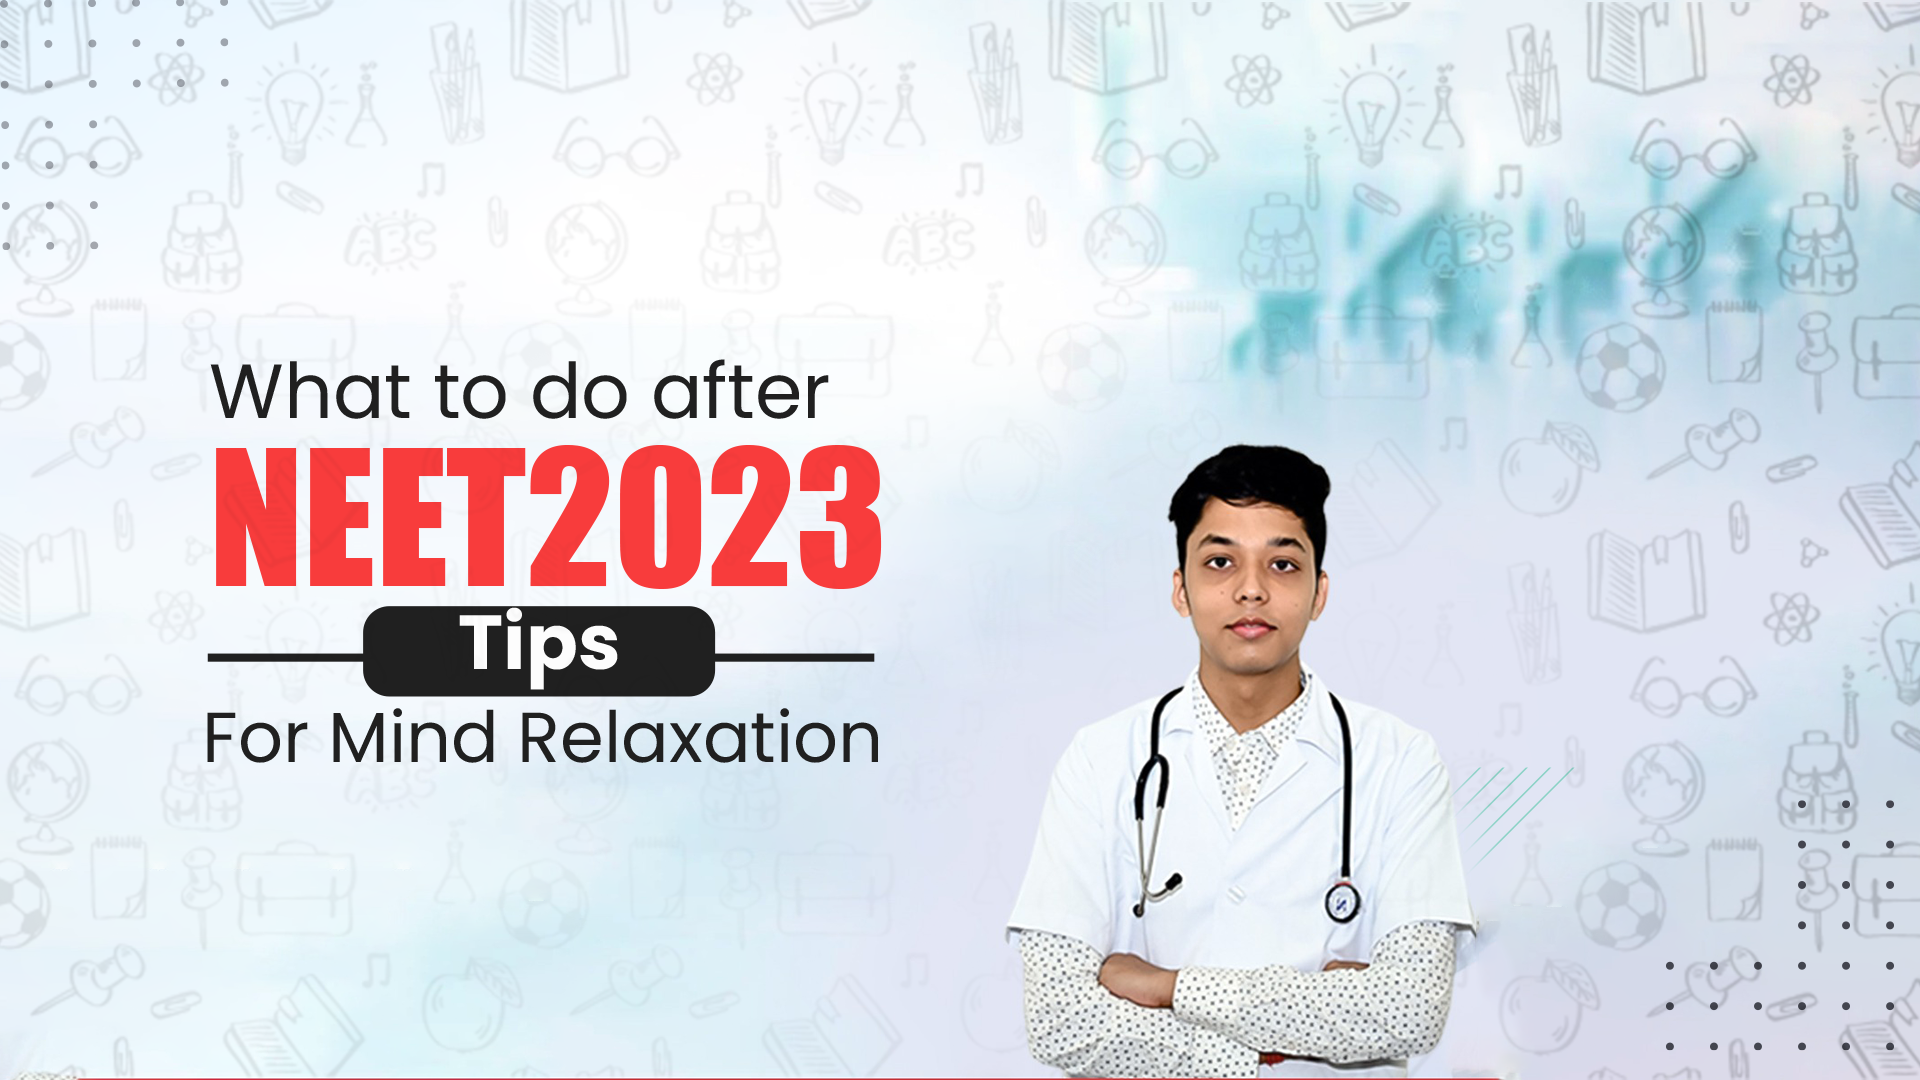 Backup Plan for NEET – Try Again for NEET or Explore Other Career Options